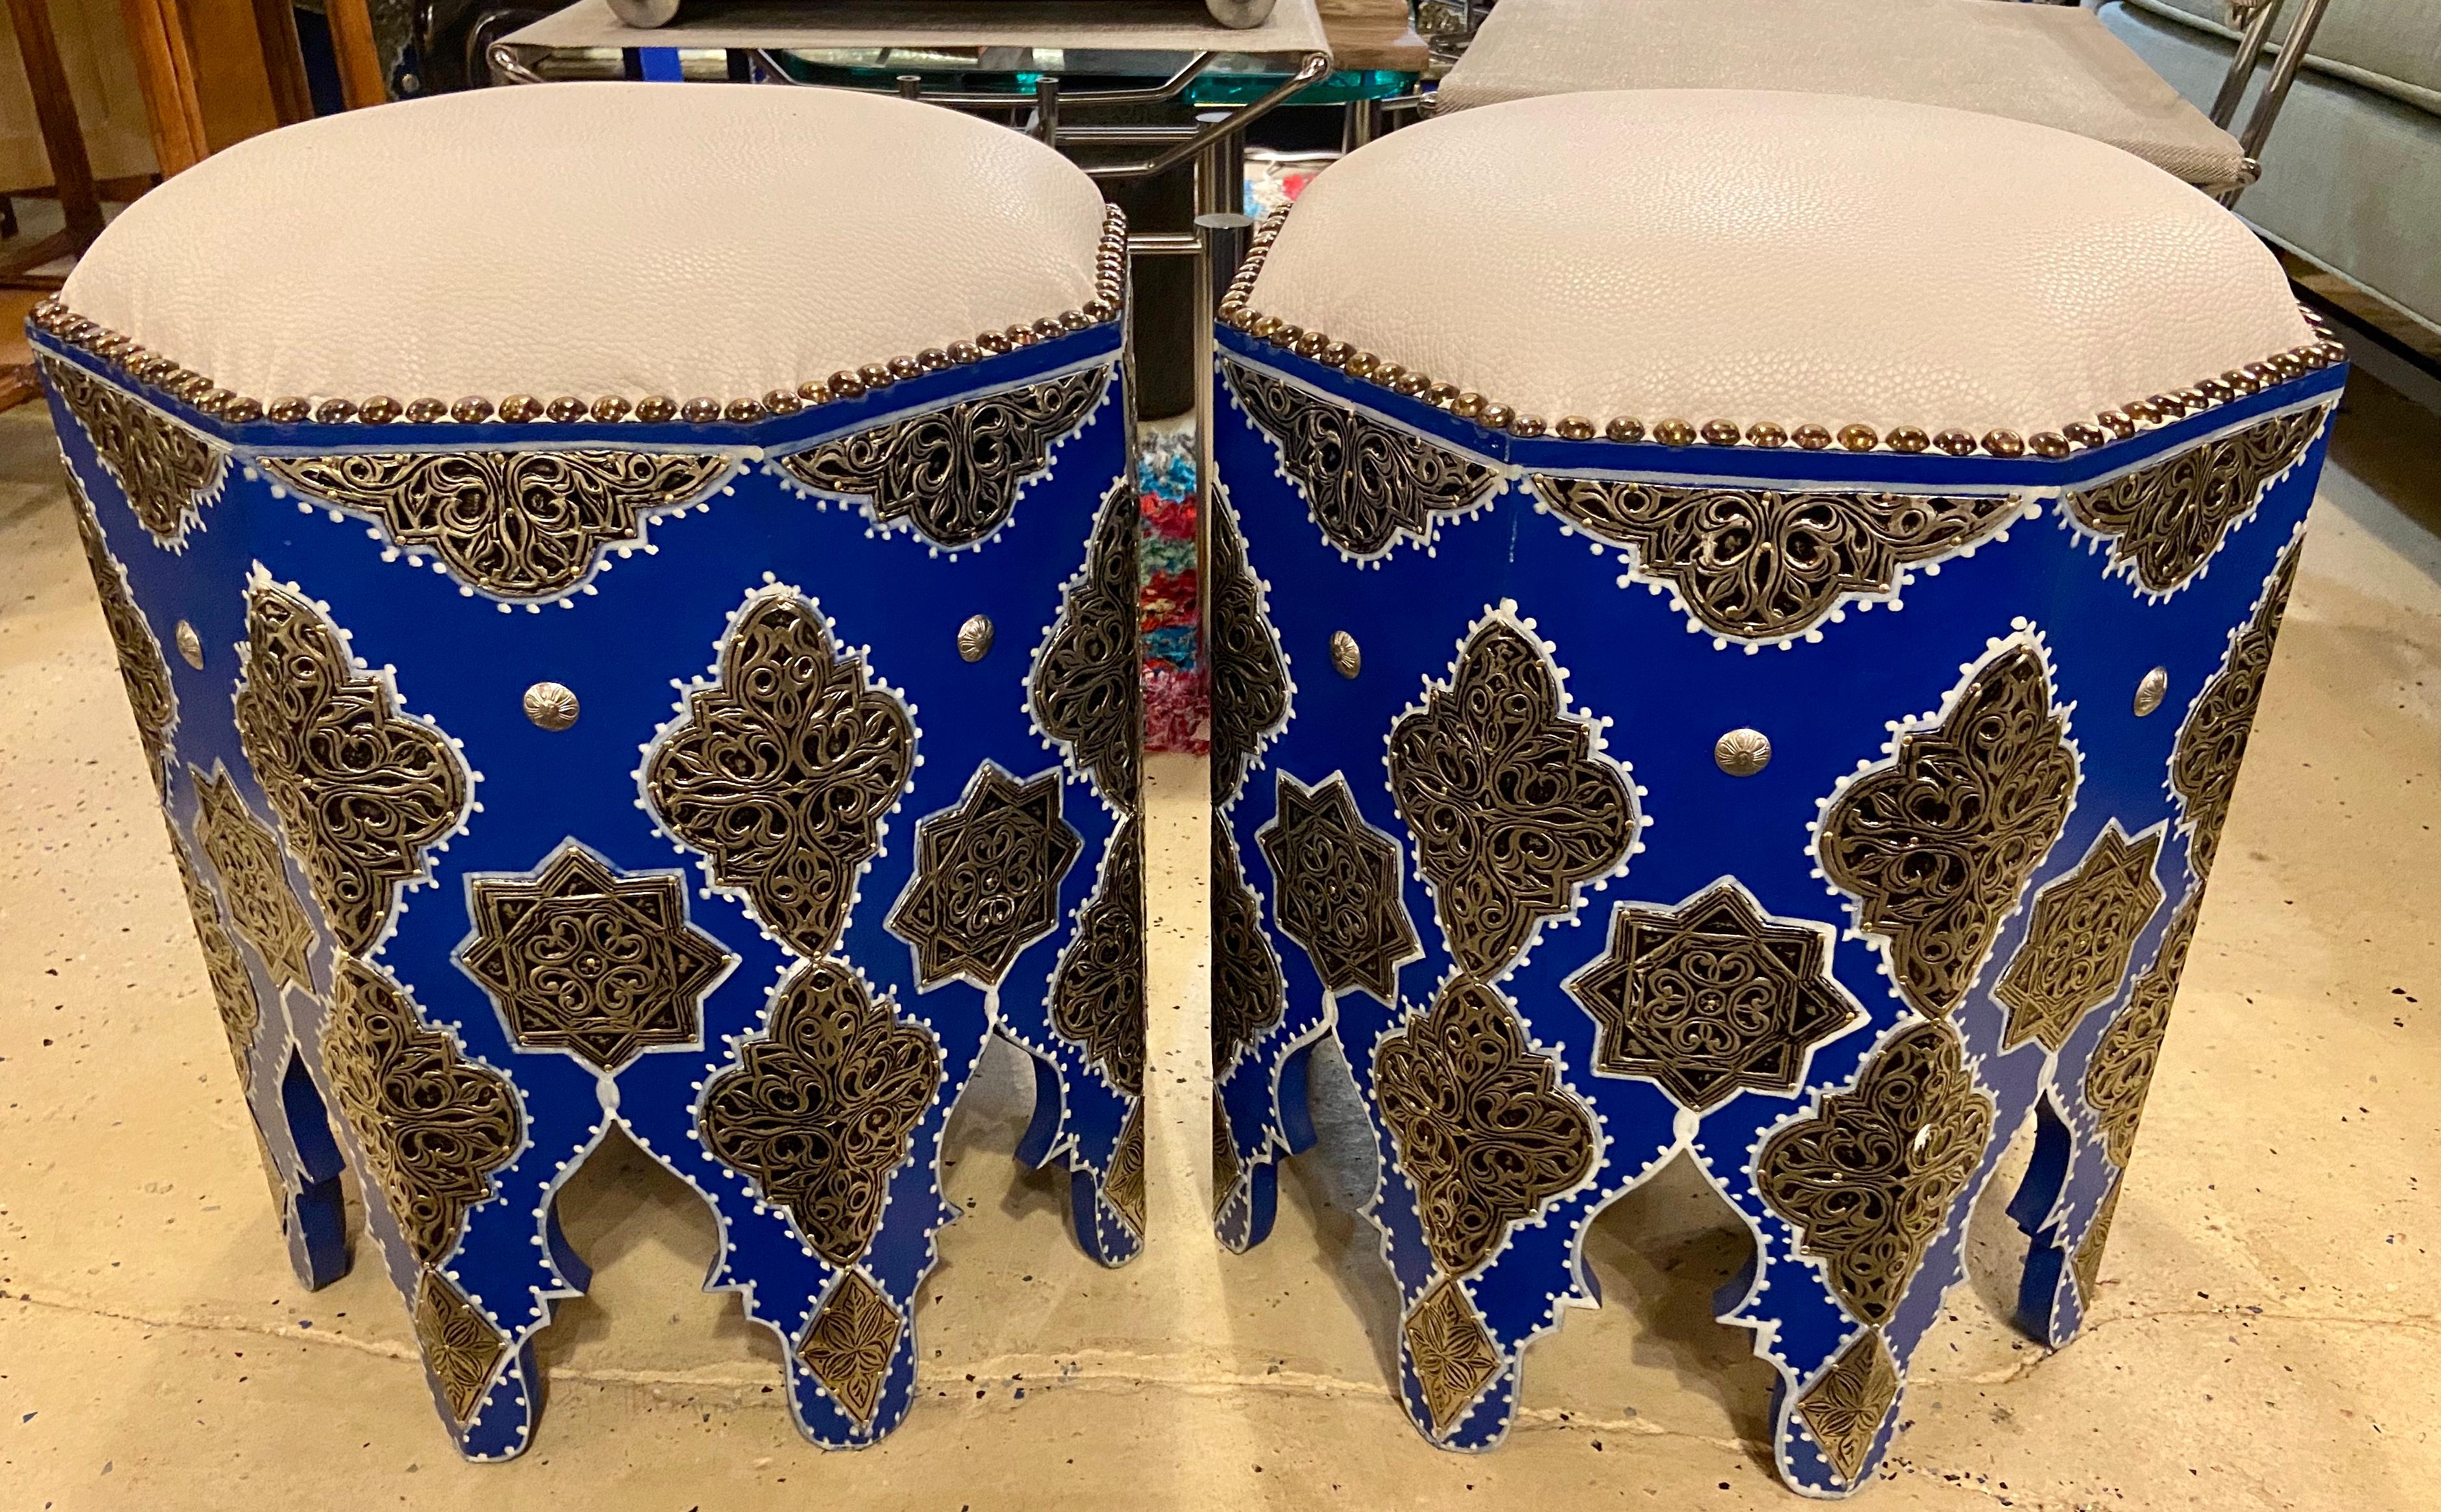 Bohemian Boho Chic Moroccan Blue Majorelle Stool or Ottoman with White Leather Top, Pair For Sale